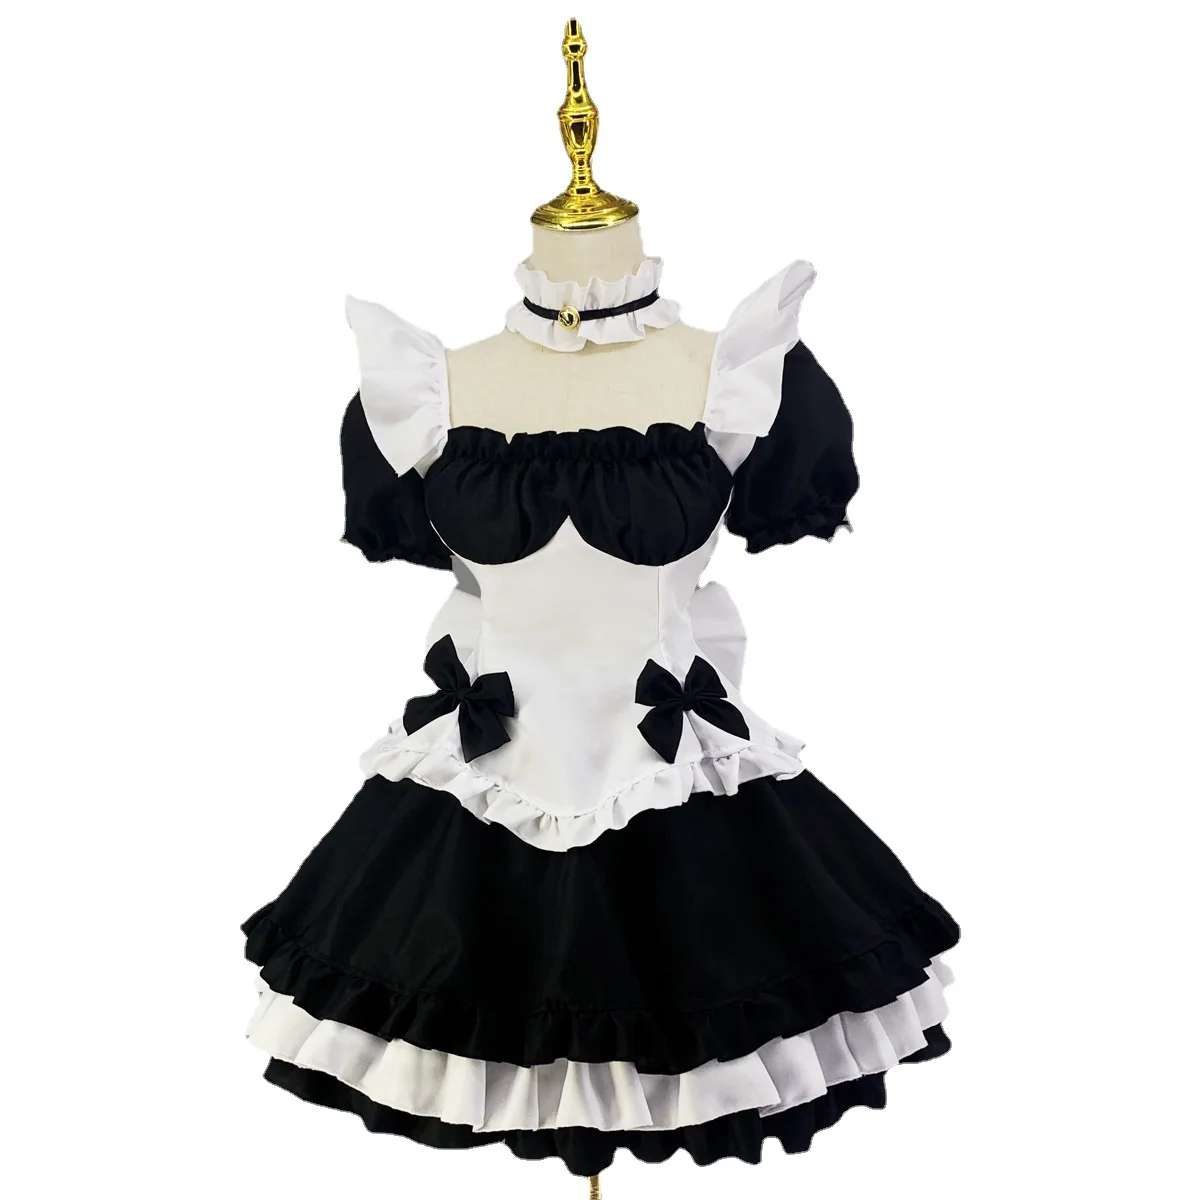 

China Embroidery #22 Maid Dress Role Play Costume Transparent Chiffon Cosplay Anime Uniform Temptation Suit Sexy Cute Lace Up